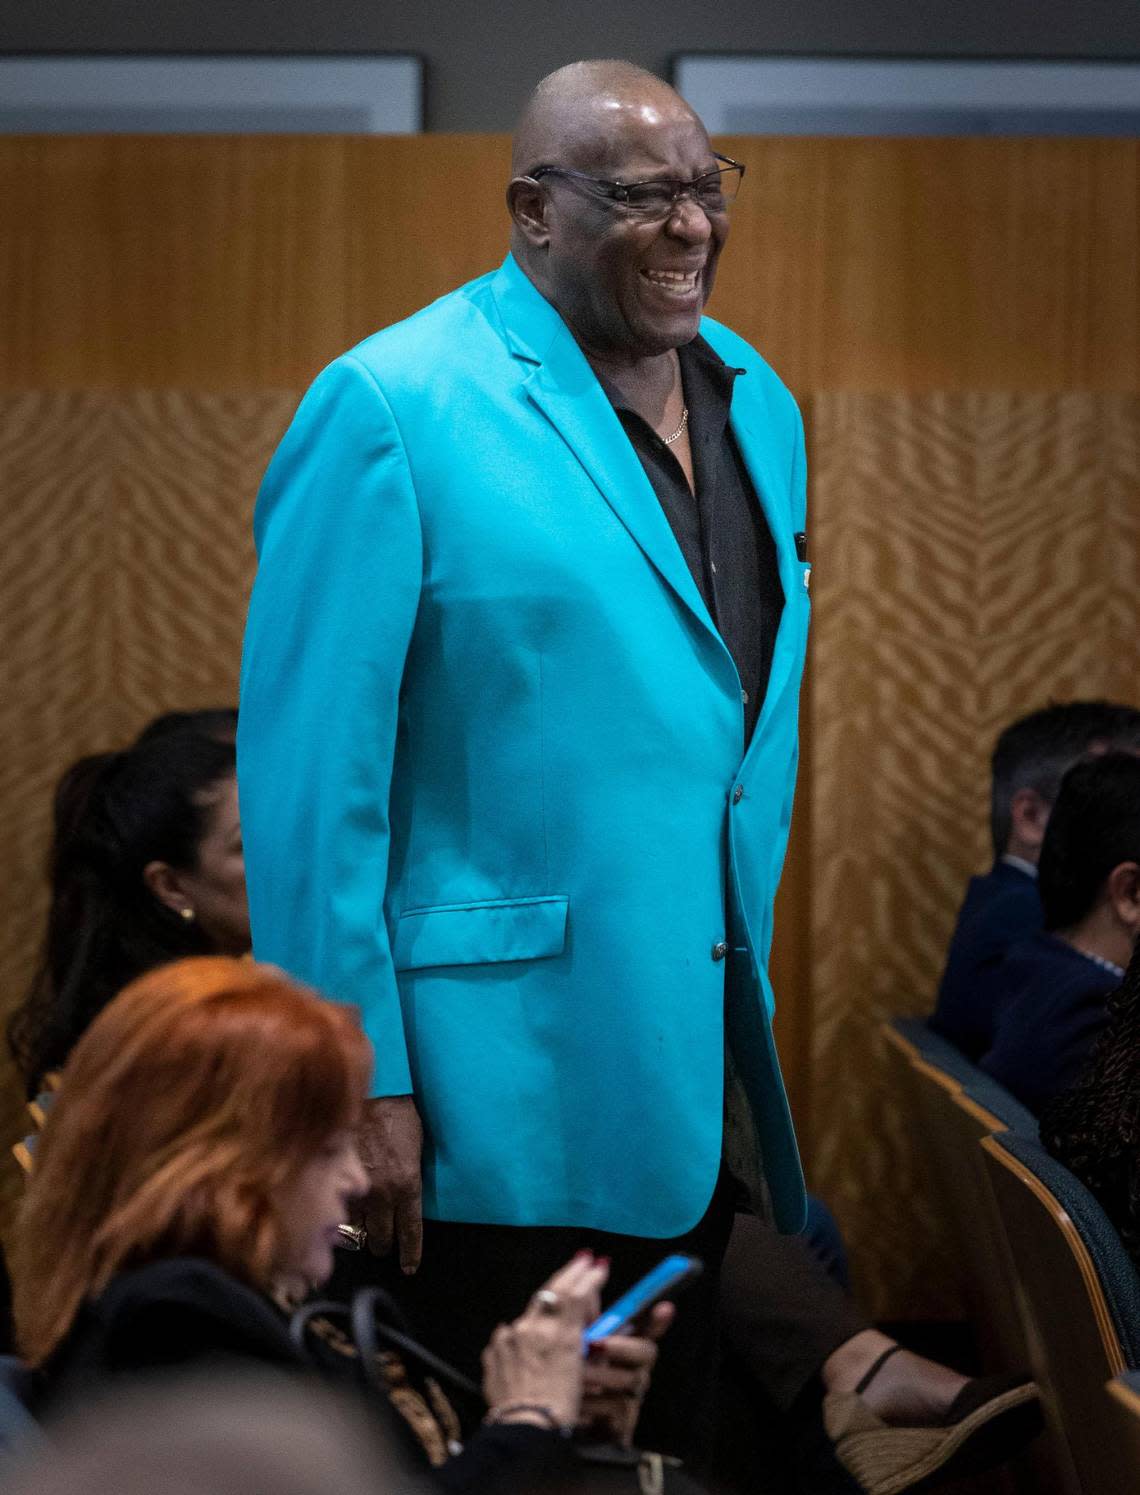 Miami, FL- January 12, 2023 - Miami Dolphins great, Larry Little smiles as he stands in the City of Miami Council Chambers. Miami City Commissioners voted unanimously to name a street after him.